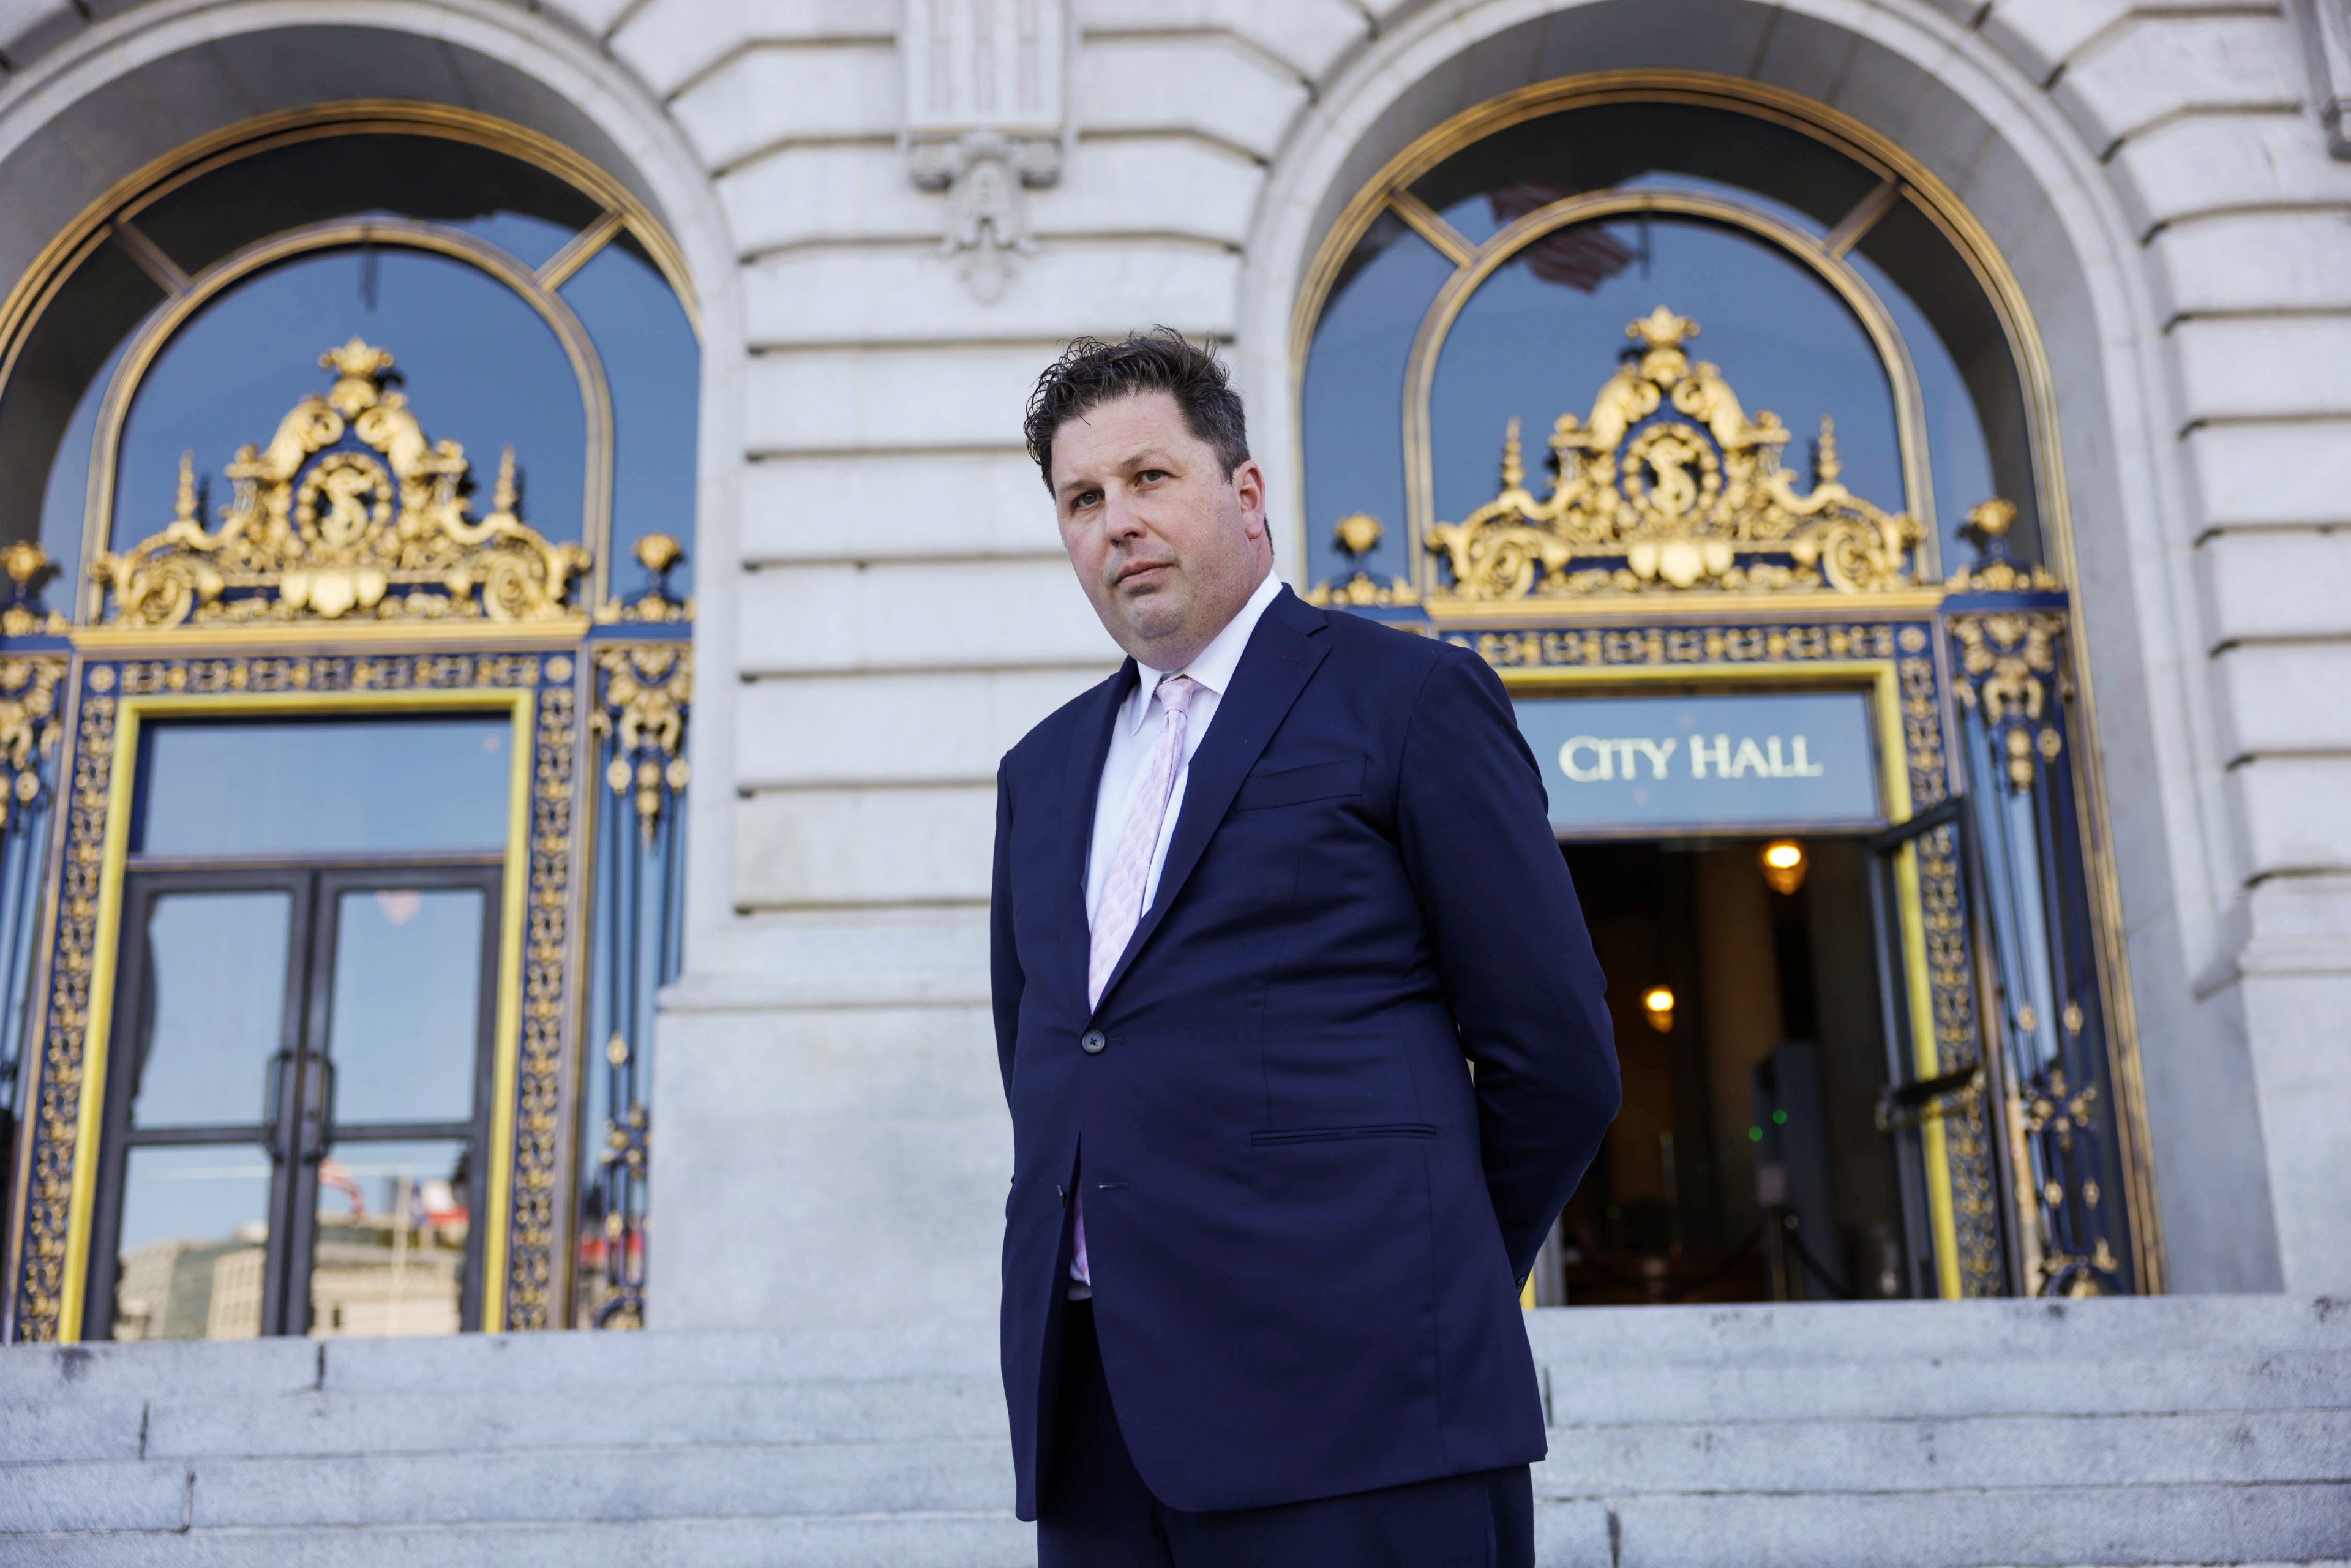 A man in a suit stands in front of an ornate &quot;City Hall&quot; entrance with elegant gold detailing.